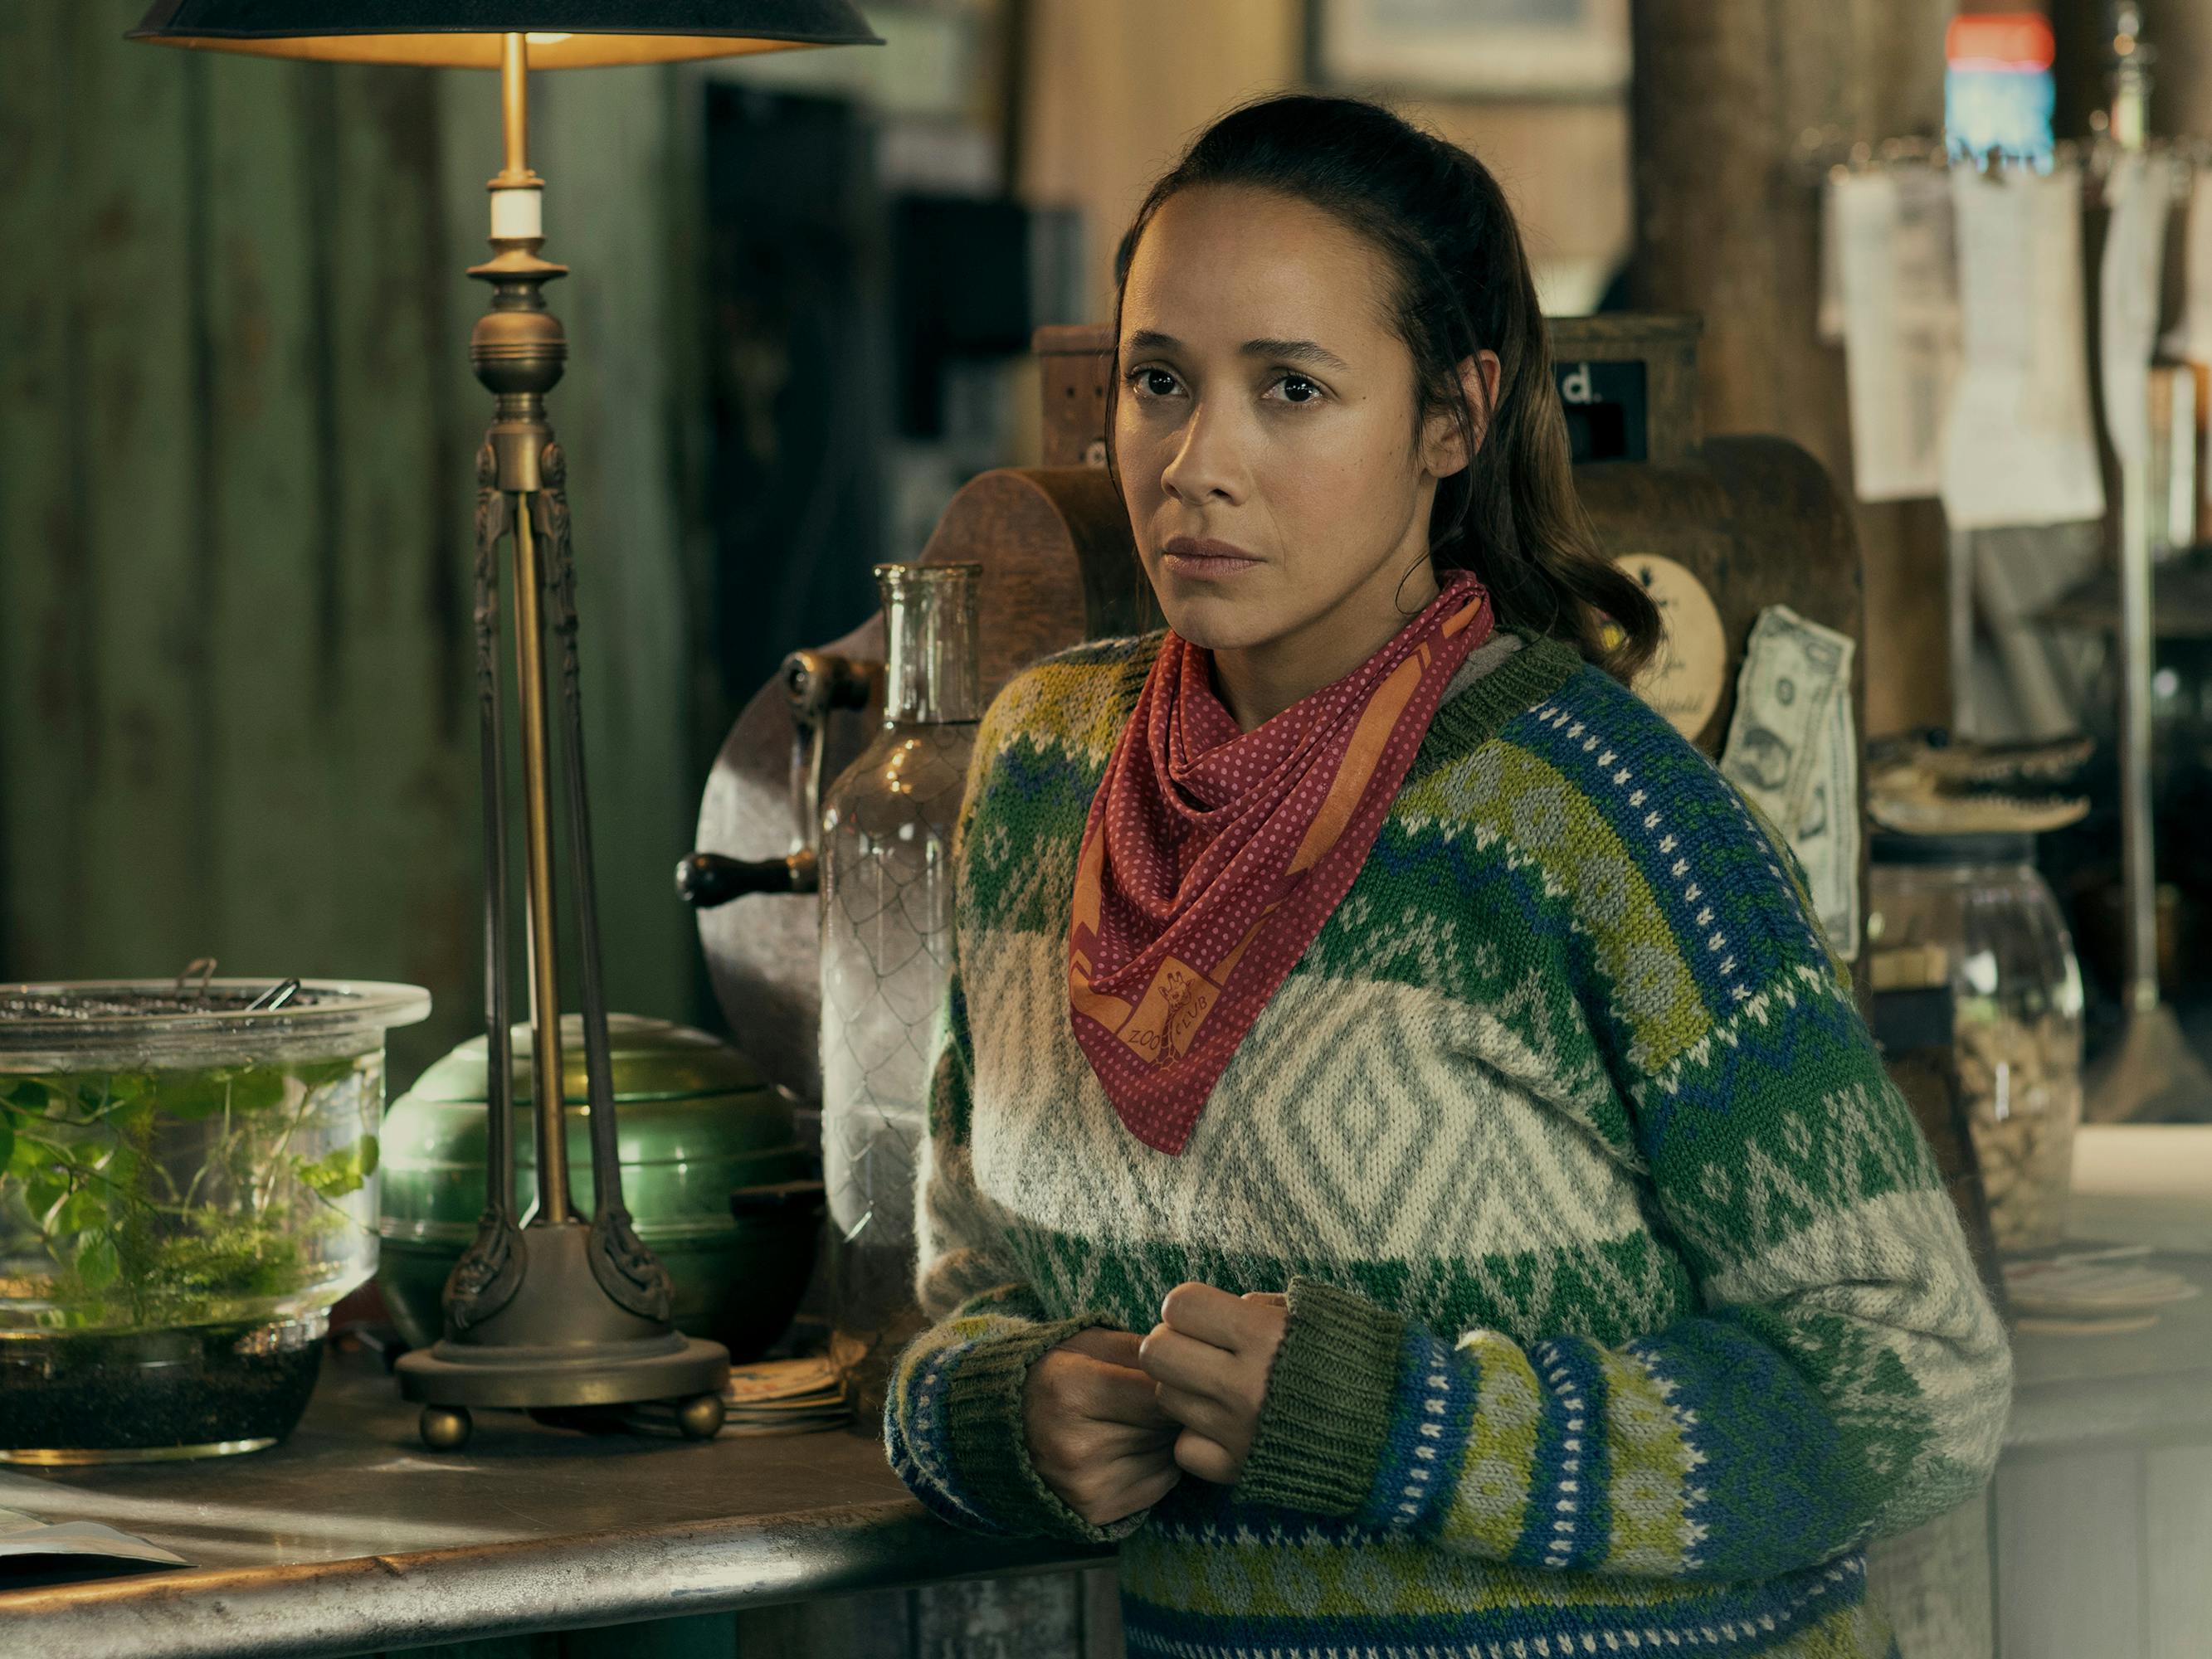 Aimee (Dania Ramirez) wears a blue-and-green sweater and a pink scarf and leans against a counter.